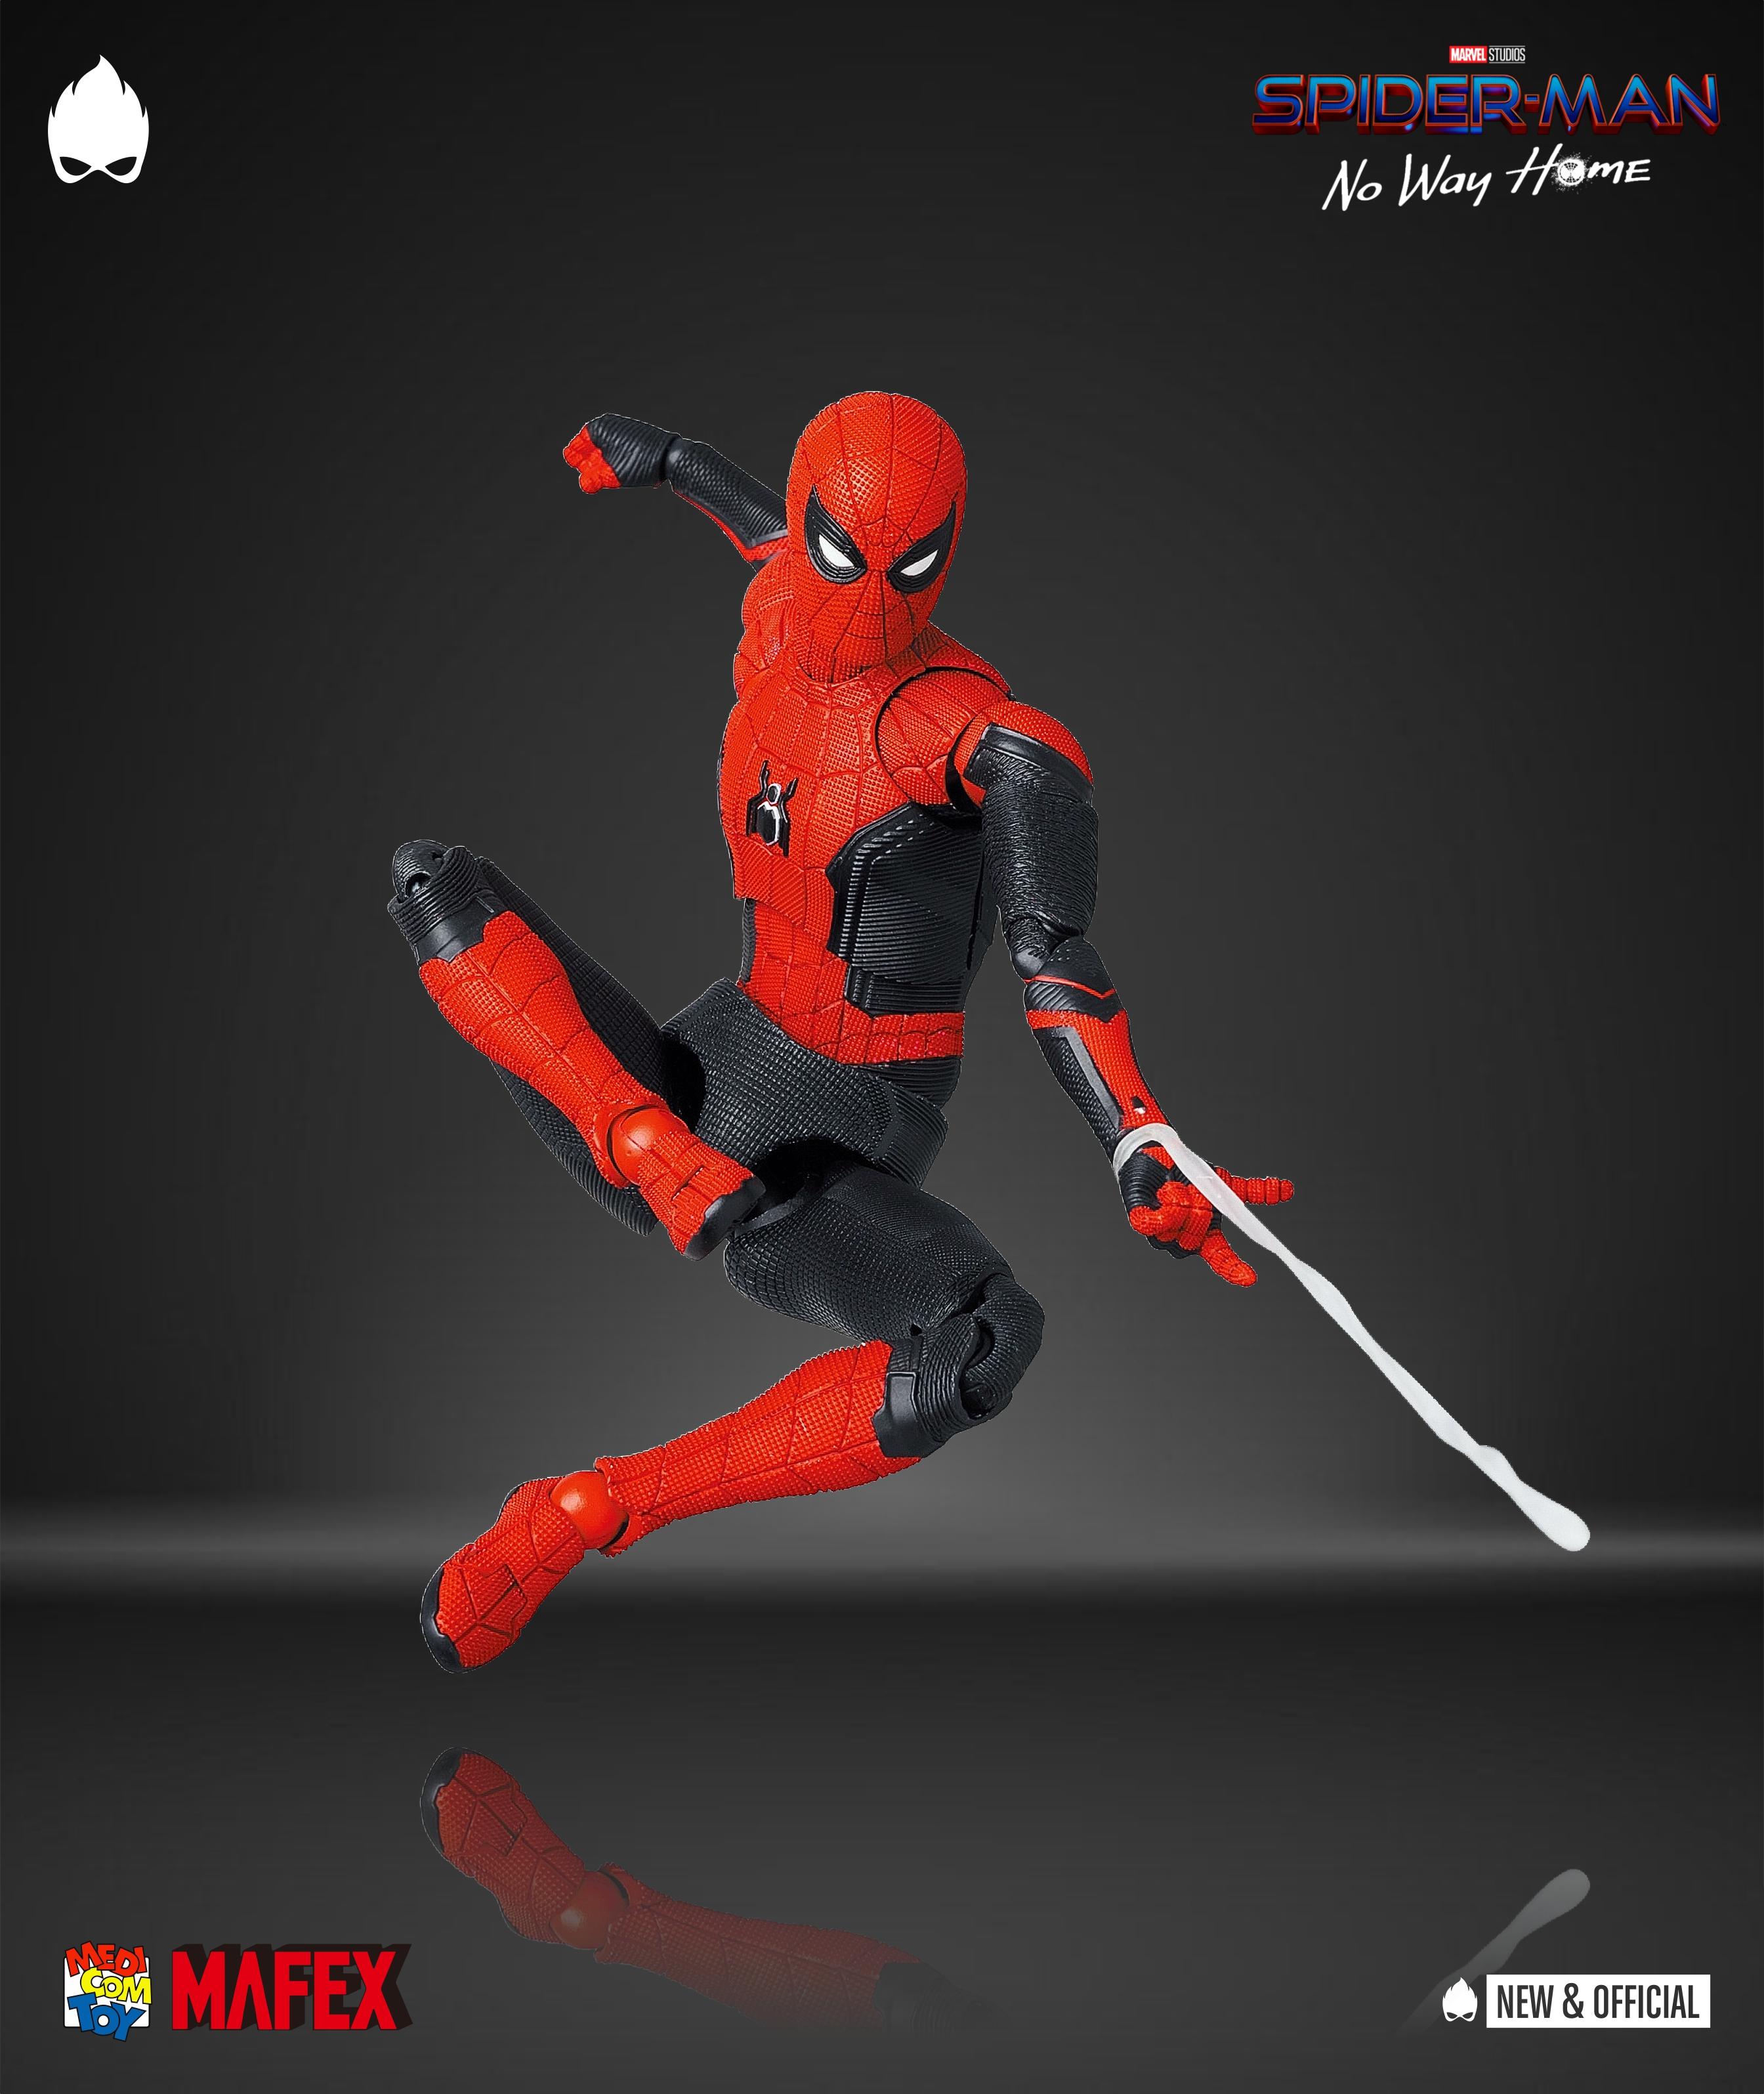 Medicom MAFEX - Spider-Man: Far From Home Action Figure 1/12 Scale